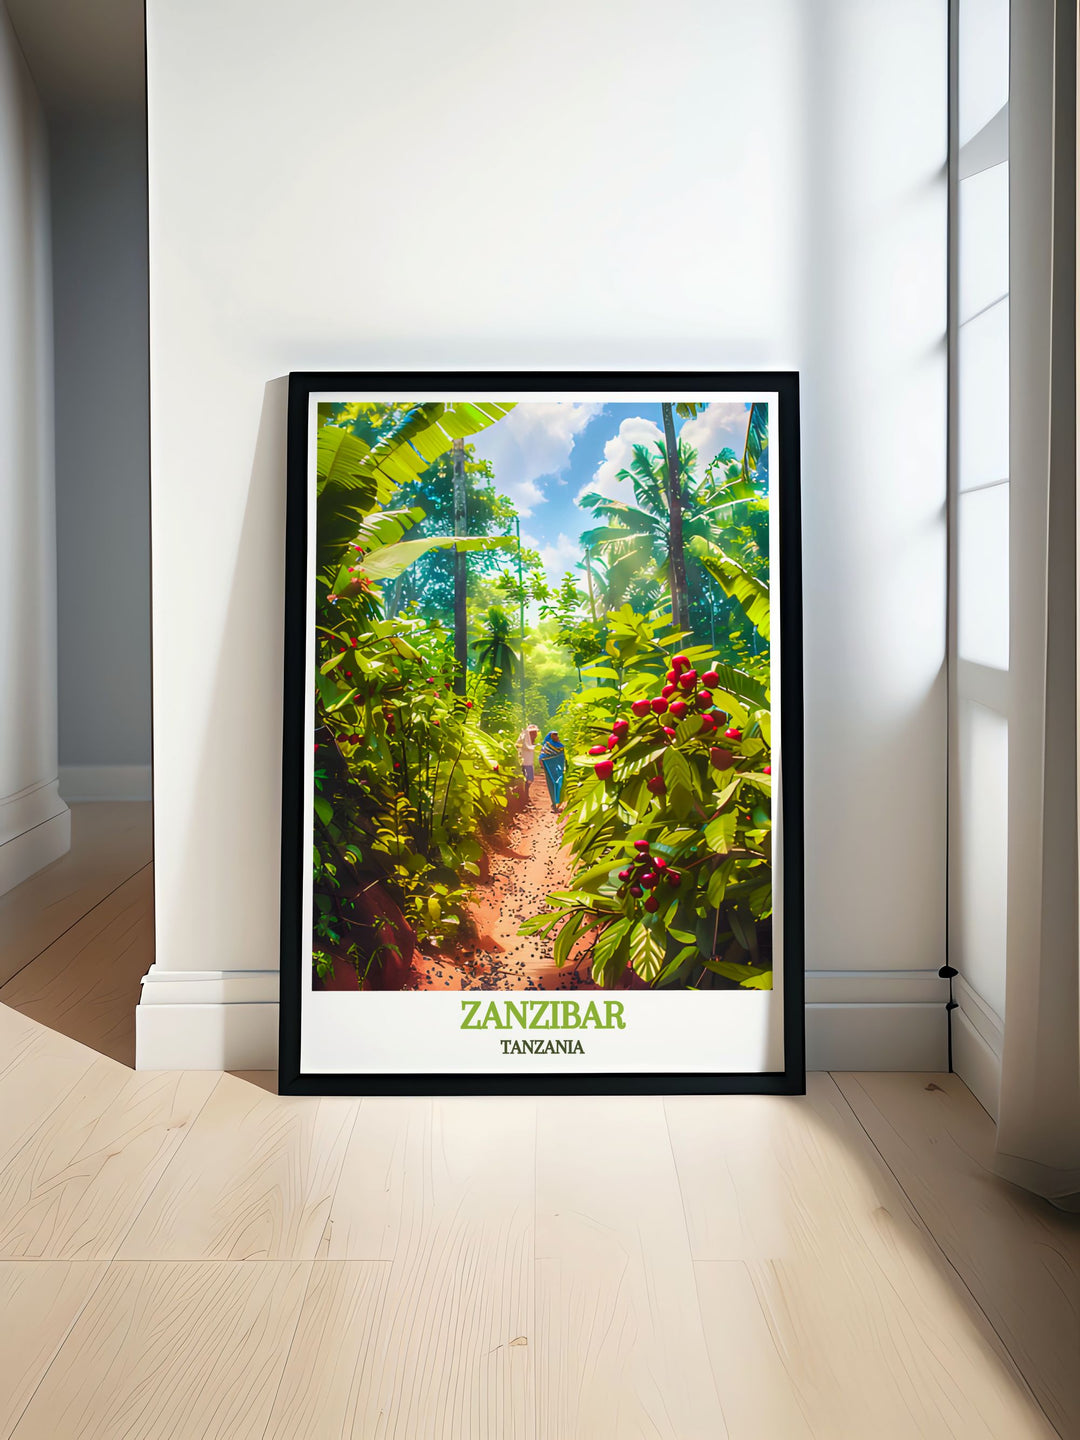 Beautiful Spice Farms wall art featuring lush fields and exotic spices perfect for enhancing your home decor with vibrant prints that bring the rich agricultural heritage of Zanzibar into your living space ideal for nature and culture enthusiasts